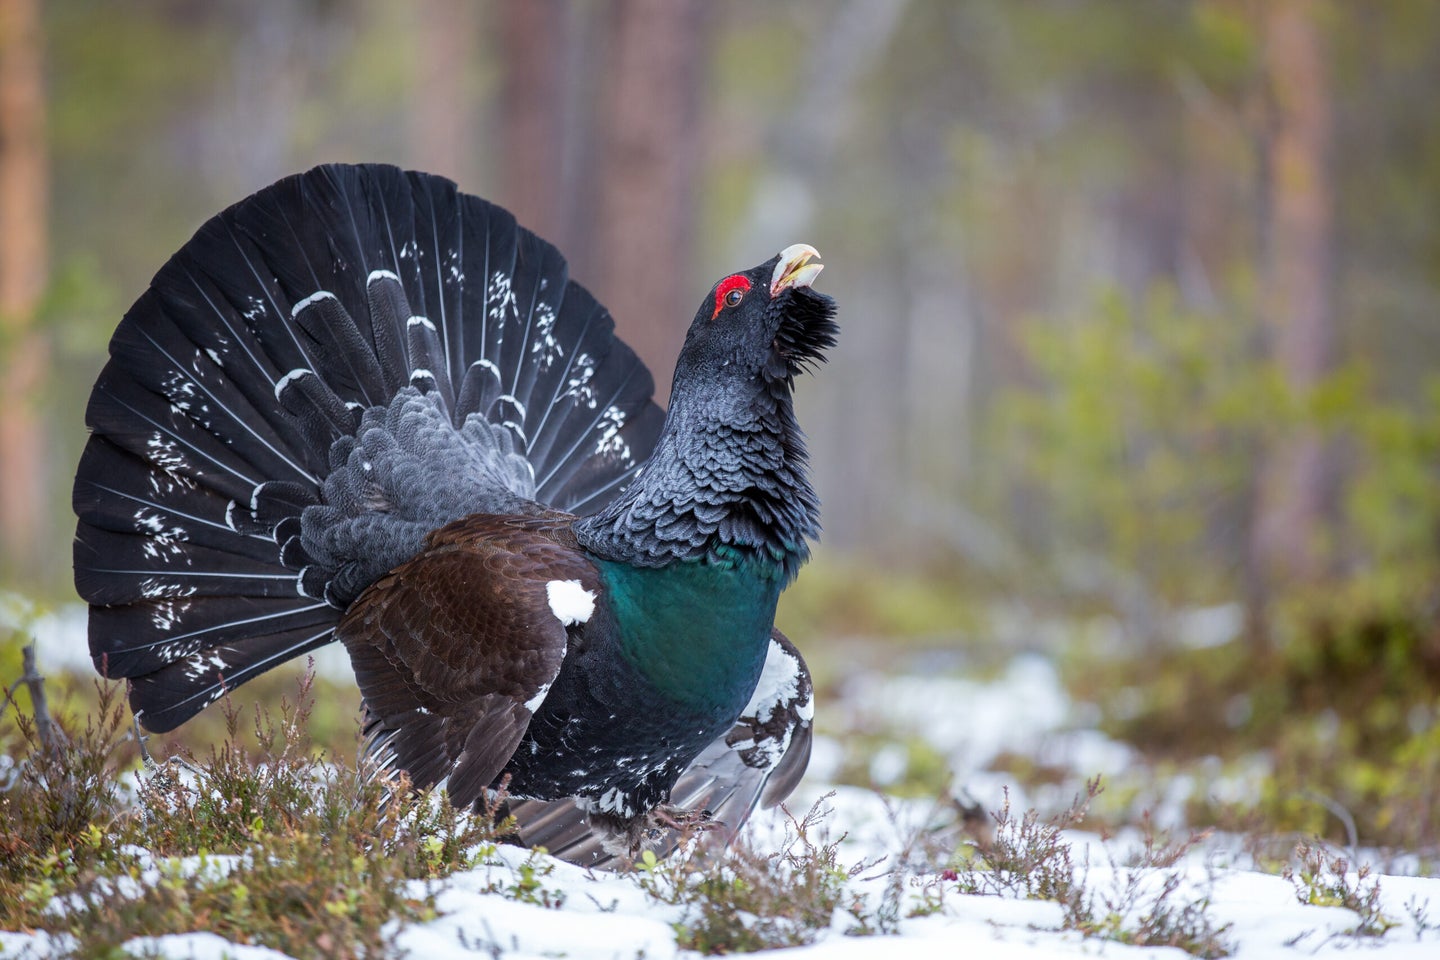 The capercaillie upland bird strutting and calling in the snow.